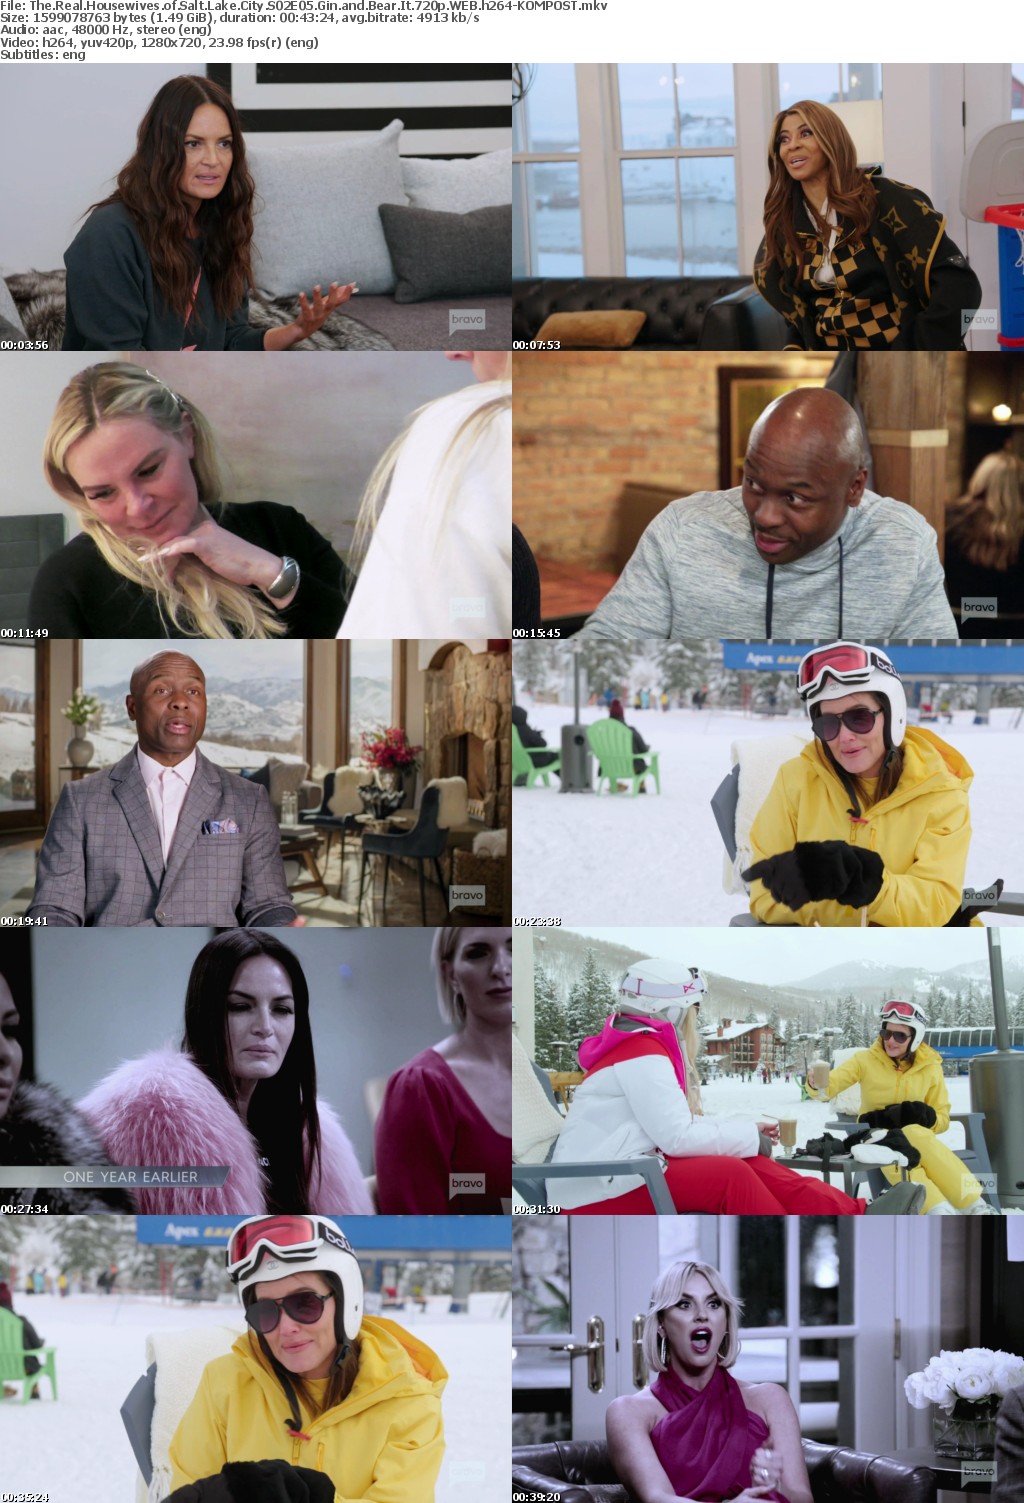 The Real Housewives of Salt Lake City S02E05 Gin and Bear It 720p WEB h264-KOMPOST